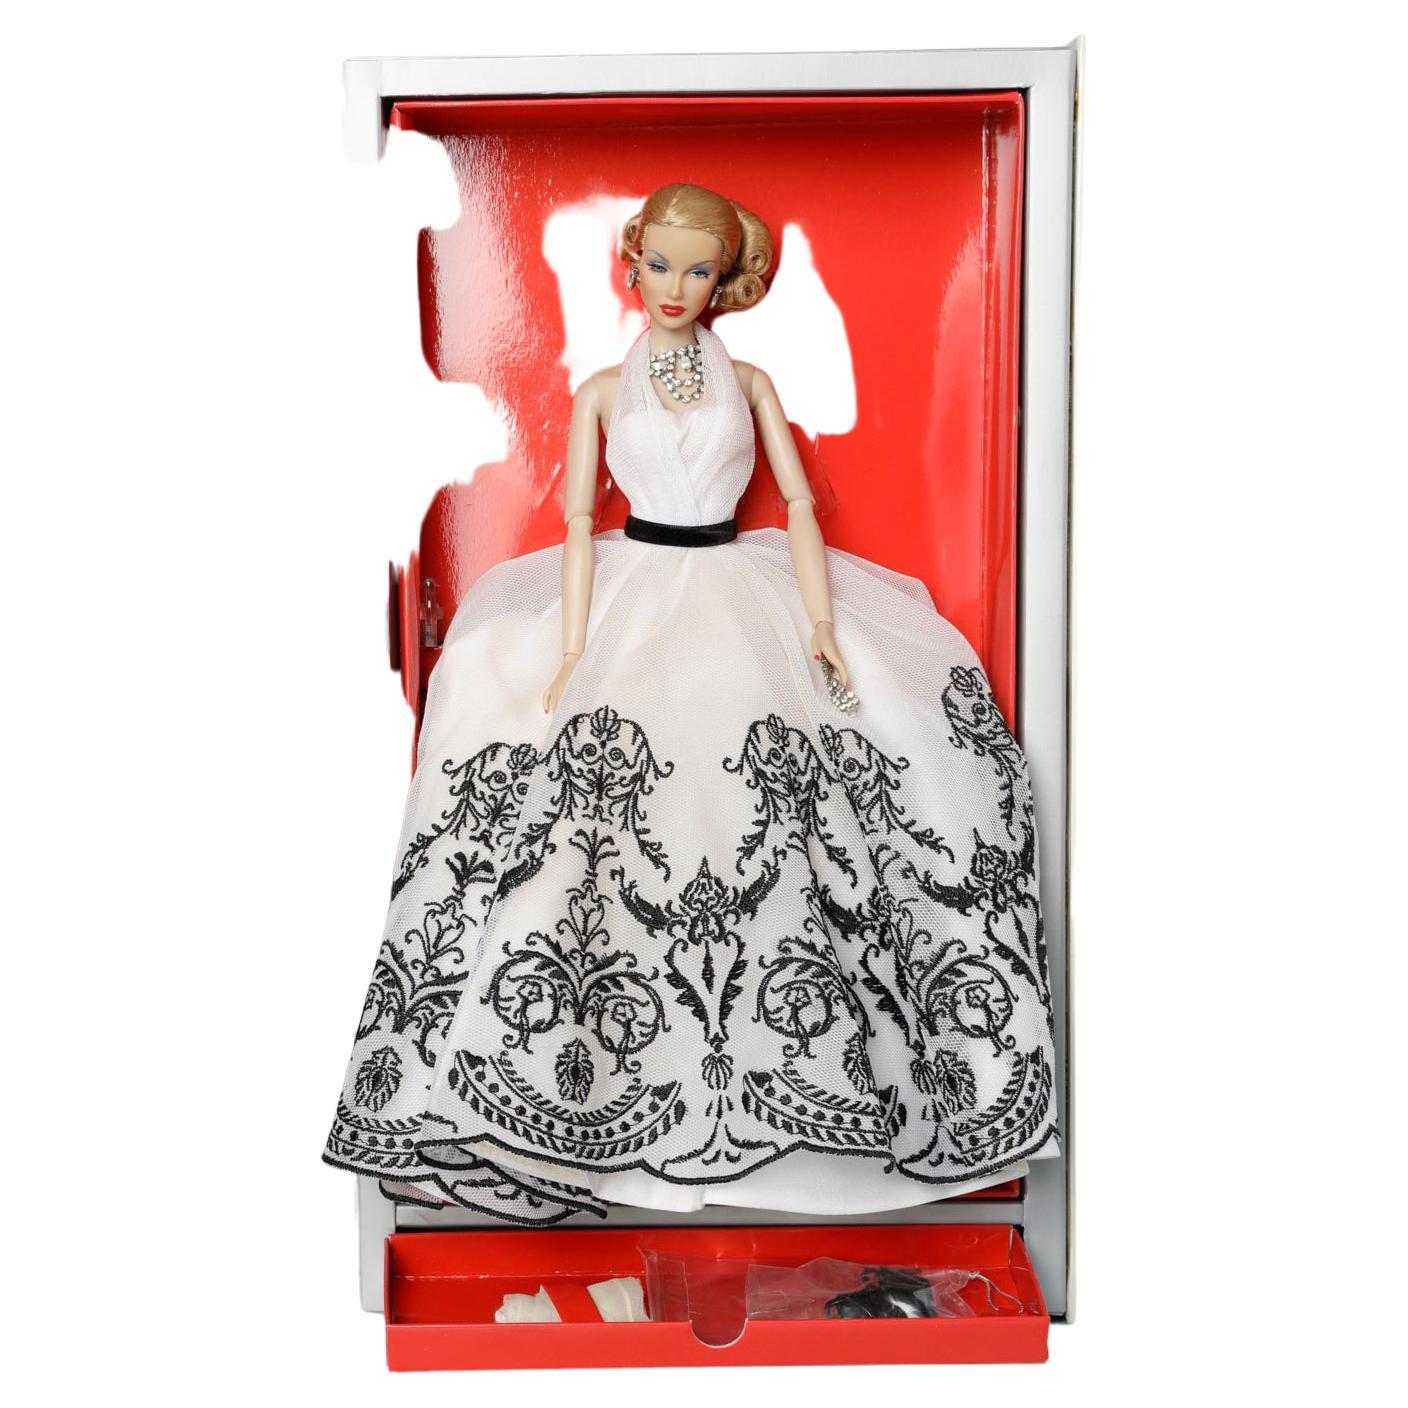 The Lana Turner doll / Hollywood Royalty For Sale